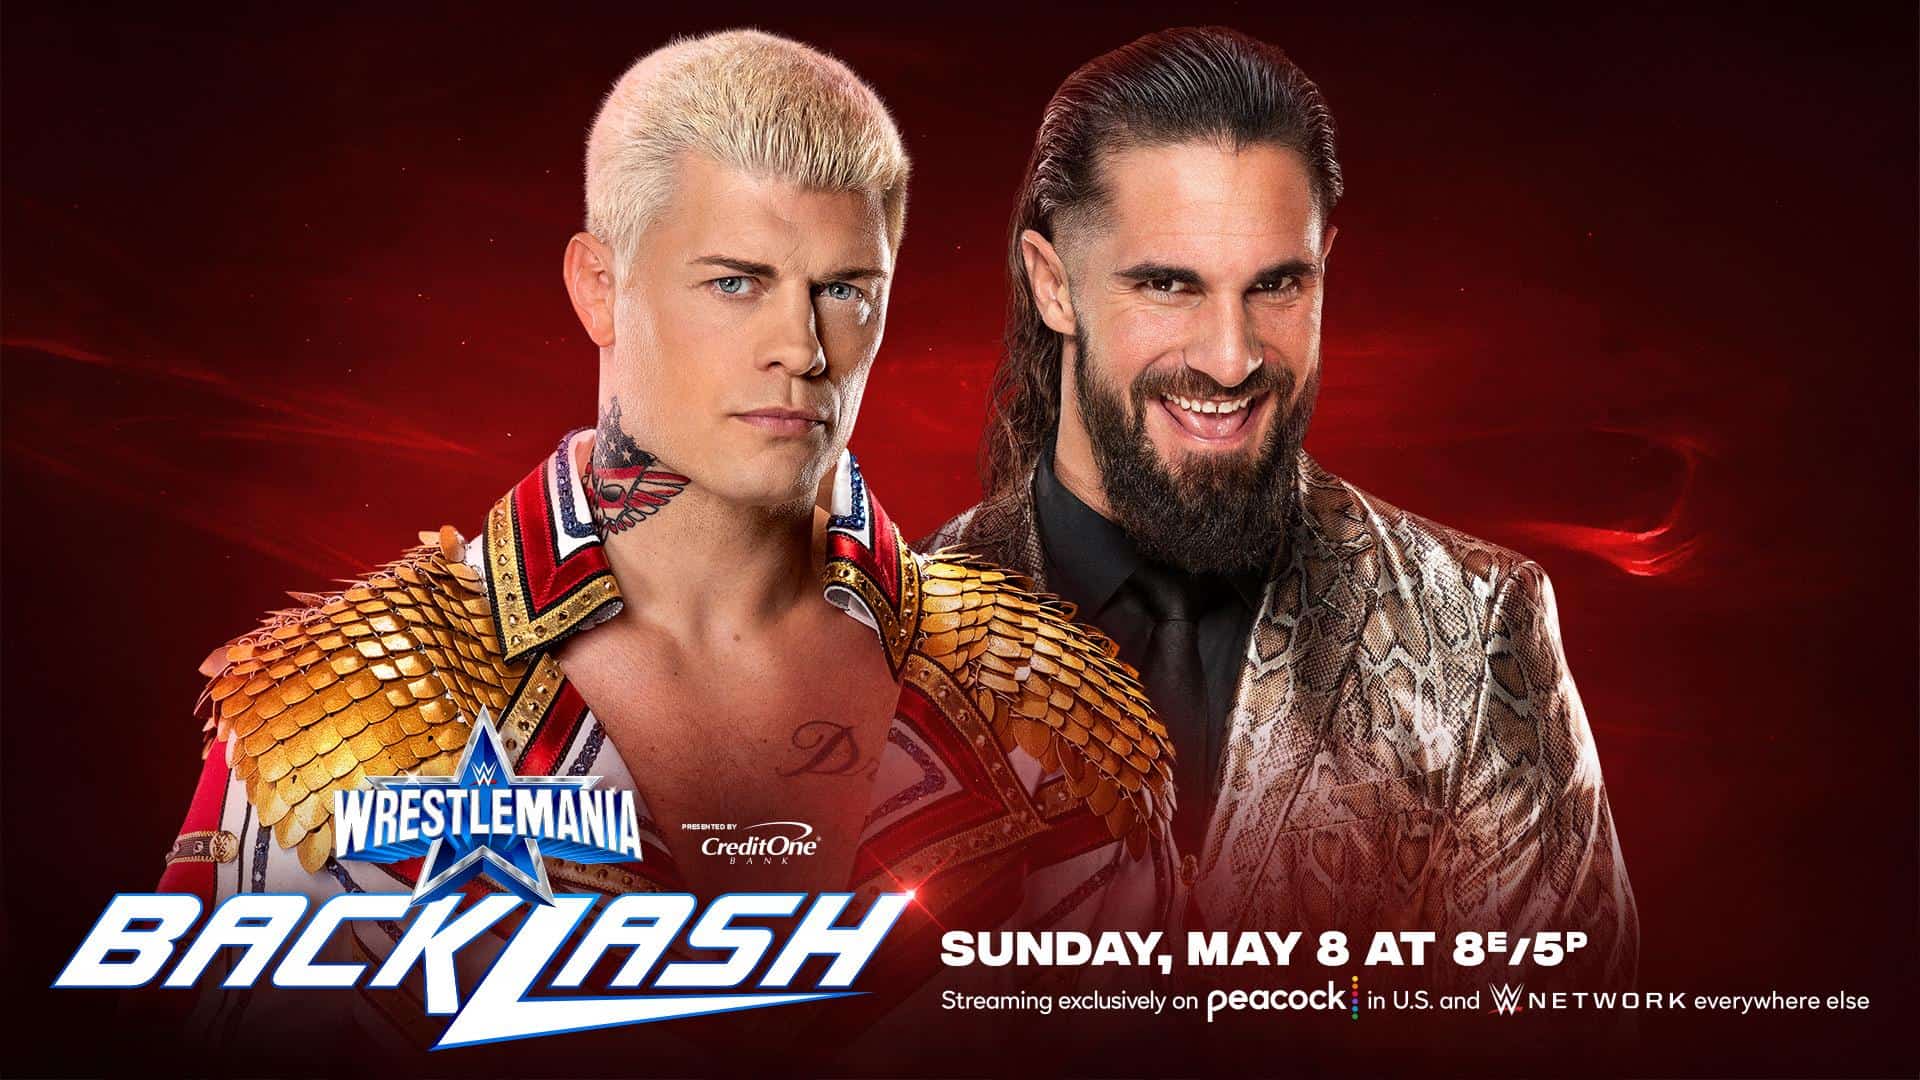 CODY RHODES WILL FACE SETH ROLLINS AT WRESTLEMANIA BACKLASH ON MAY 8 2022